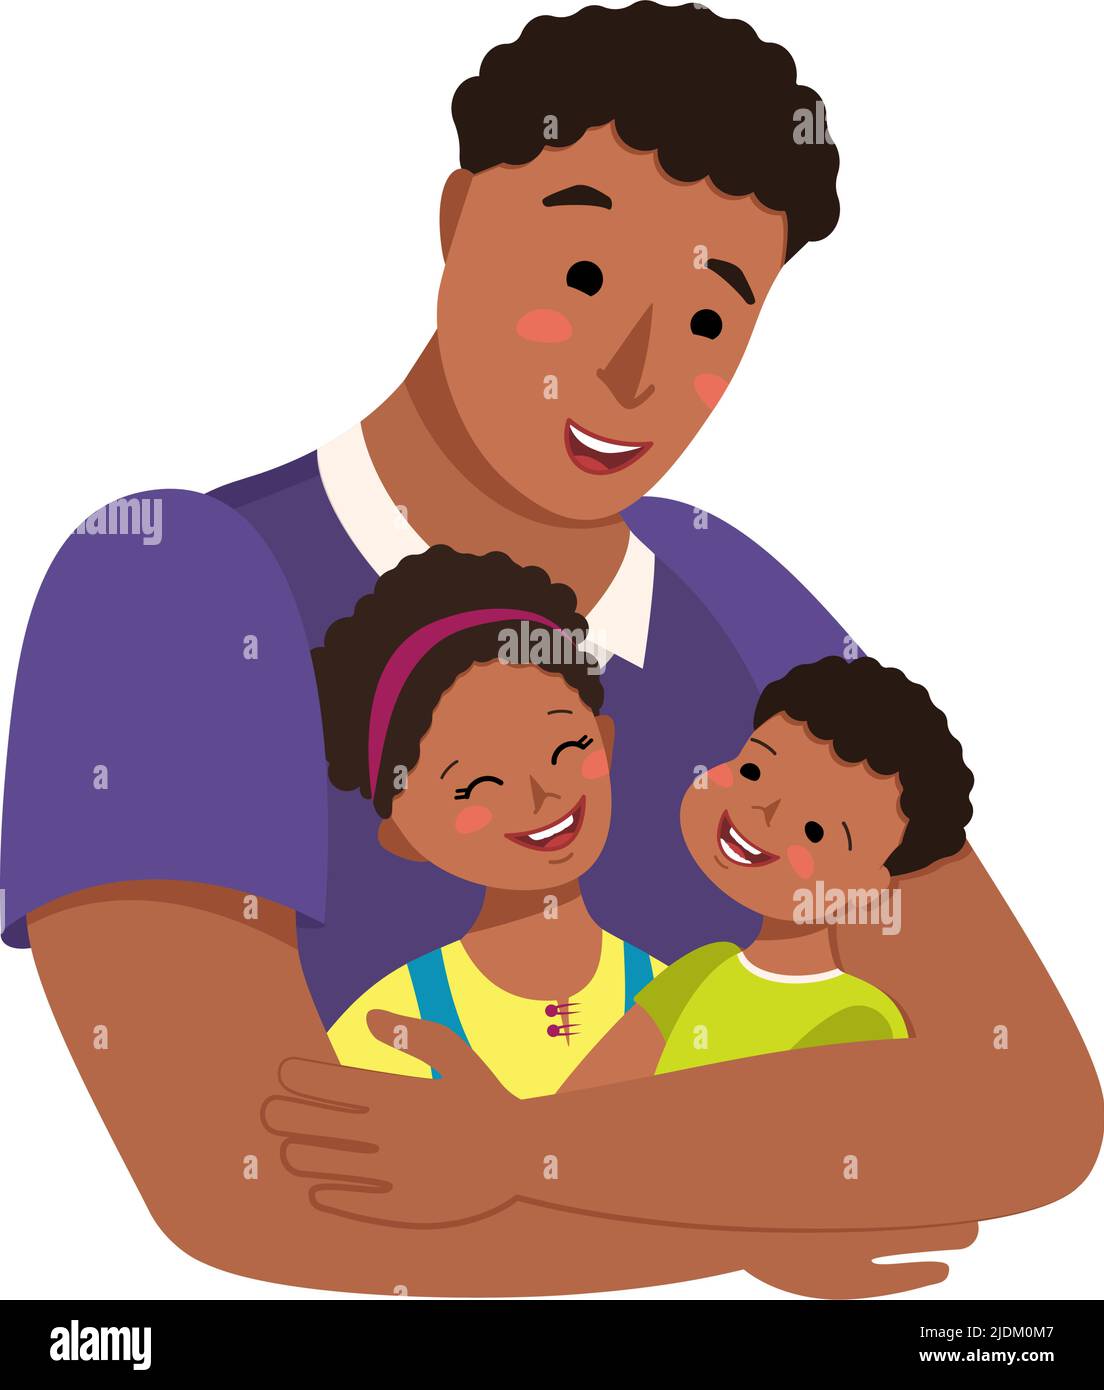 Dad hugs his son and daughter. Happy family. The man spends time with the children. International father day, men day. Education and care. Vector flat cartoon illustration people Stock Vector